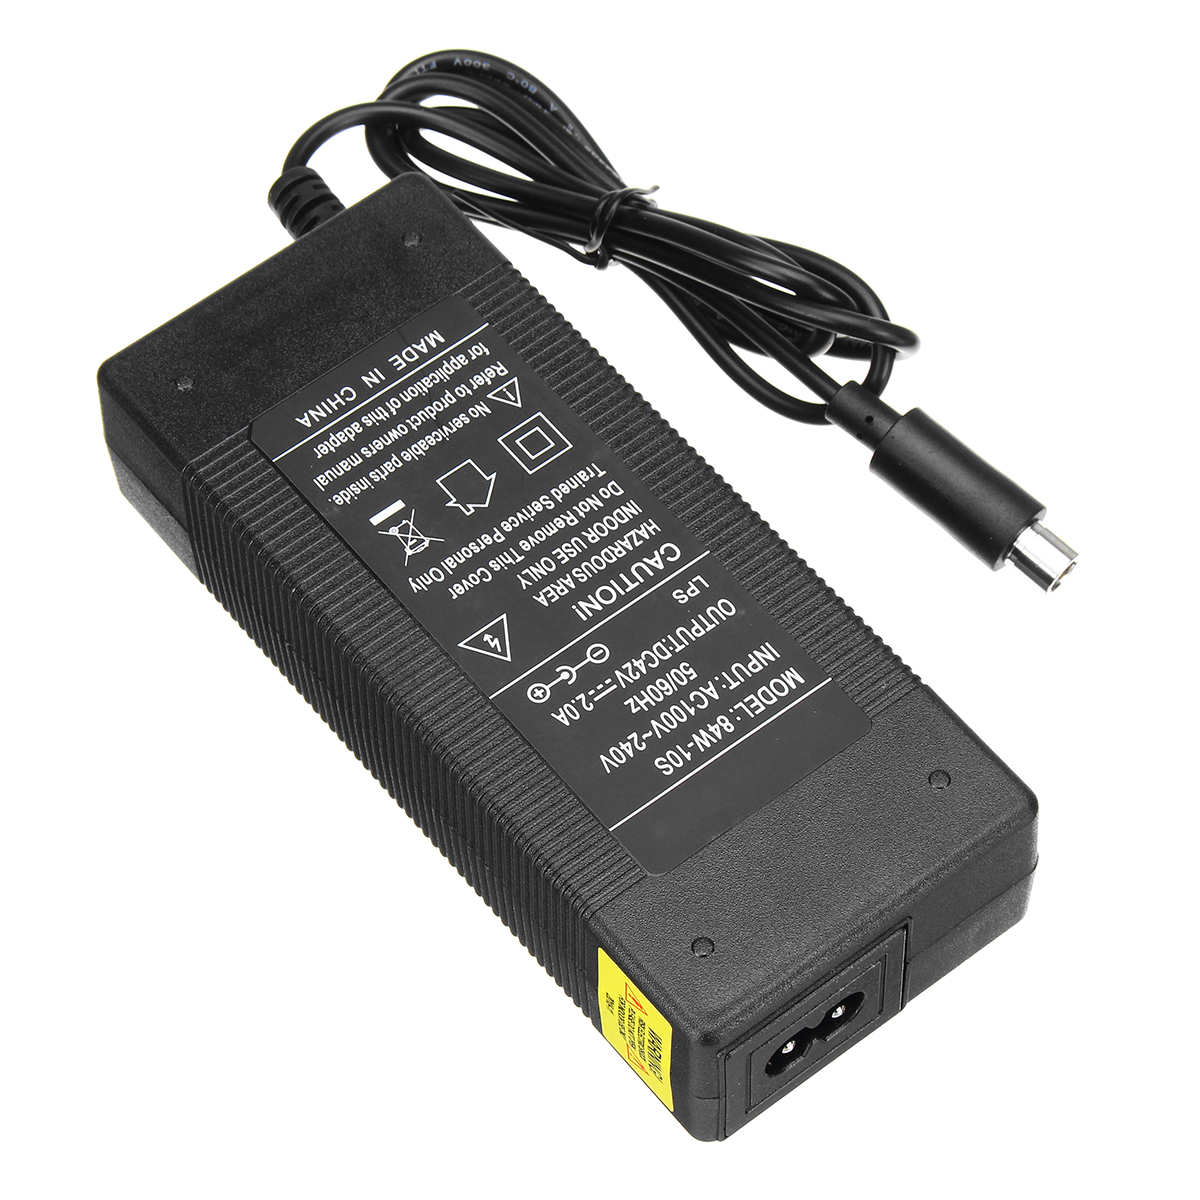 DC42V-17A-Lithium-Battery-Charger-Battery-Equipment-for-Scooter-For-Ninebot-Scooter-1417293-5